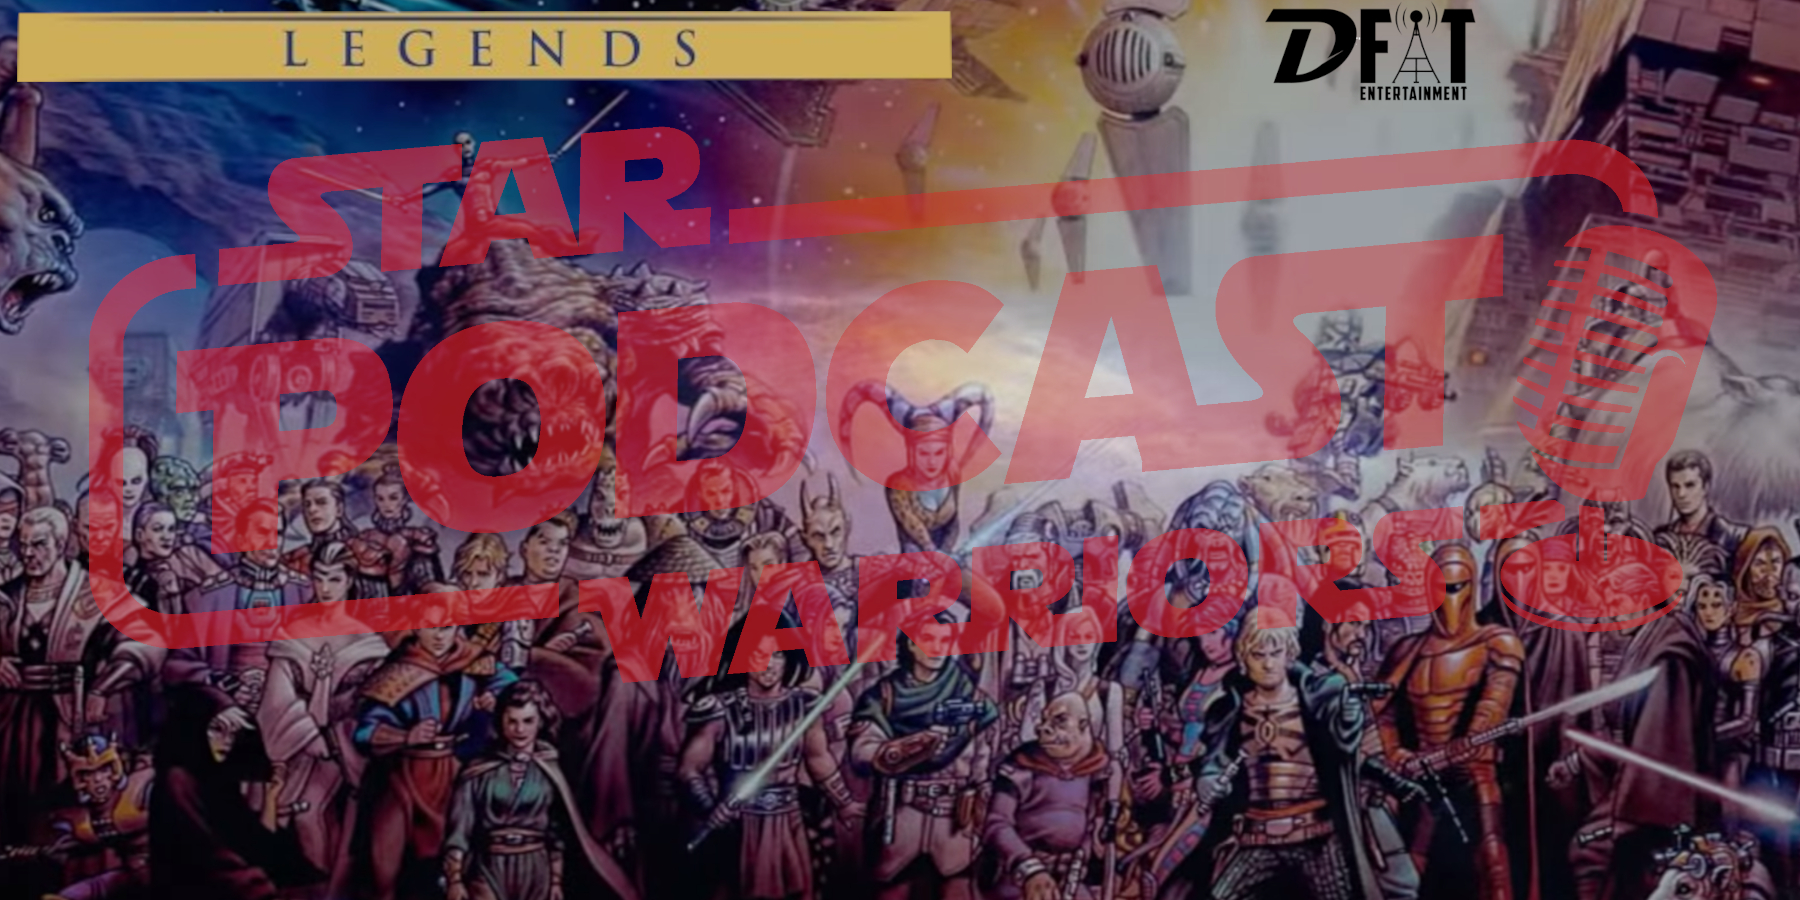 Star Wars Legends of the Expanded Universe